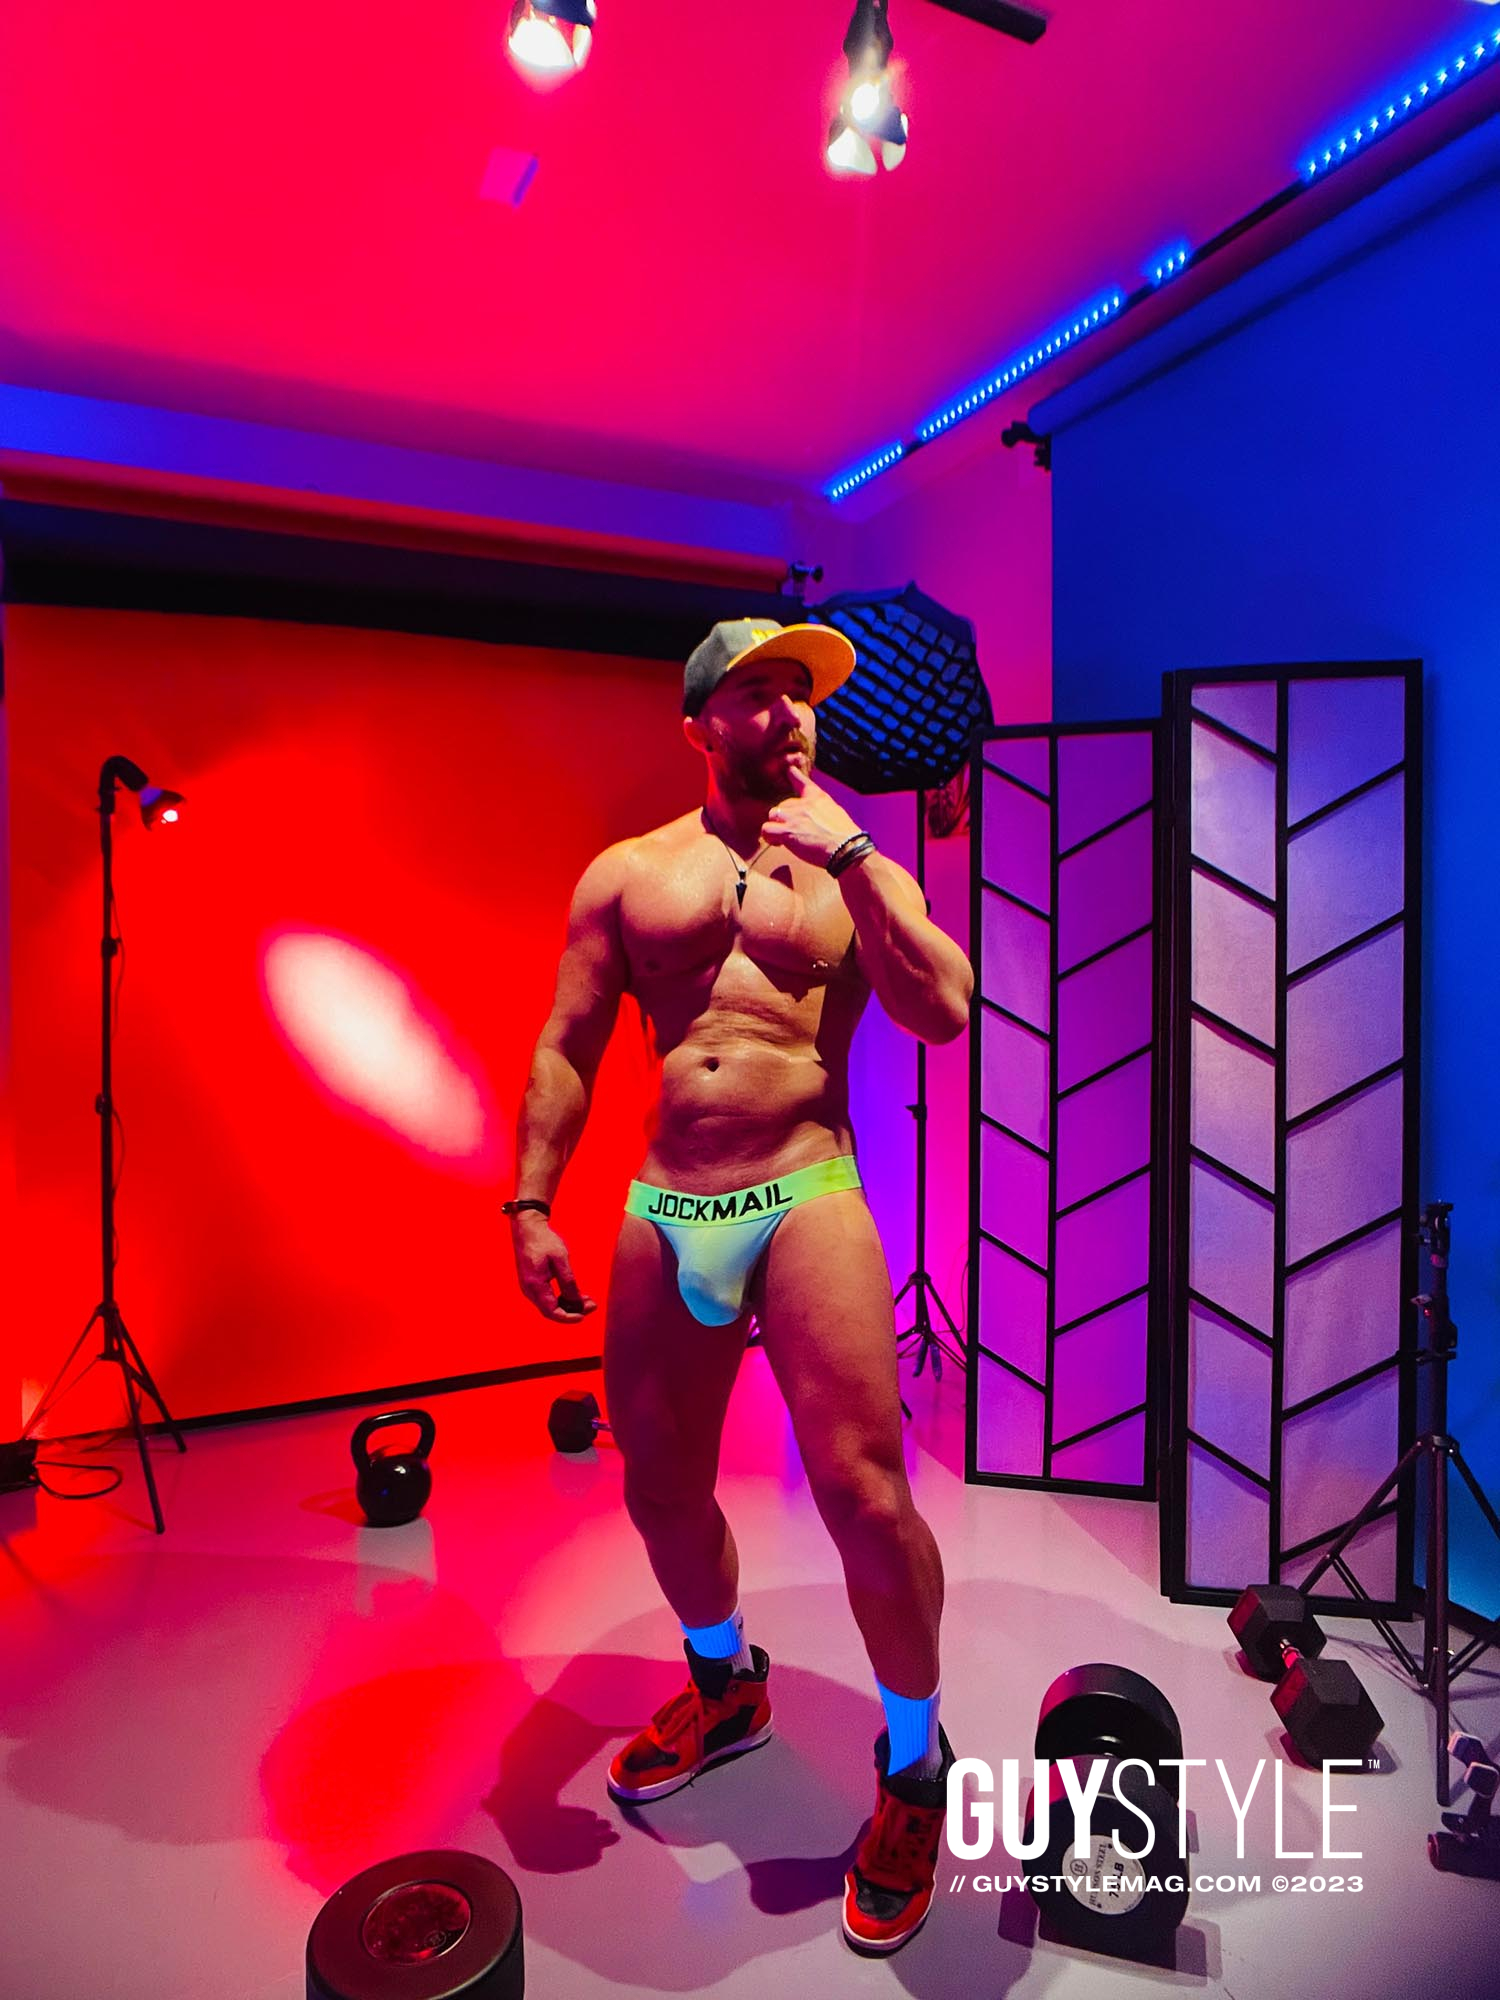 Neon Dreams & Gym Routines: JOCKMAIL's Trendsetting Take on Underwear! – Men's Underwear Reviews with Maxwell Alexander